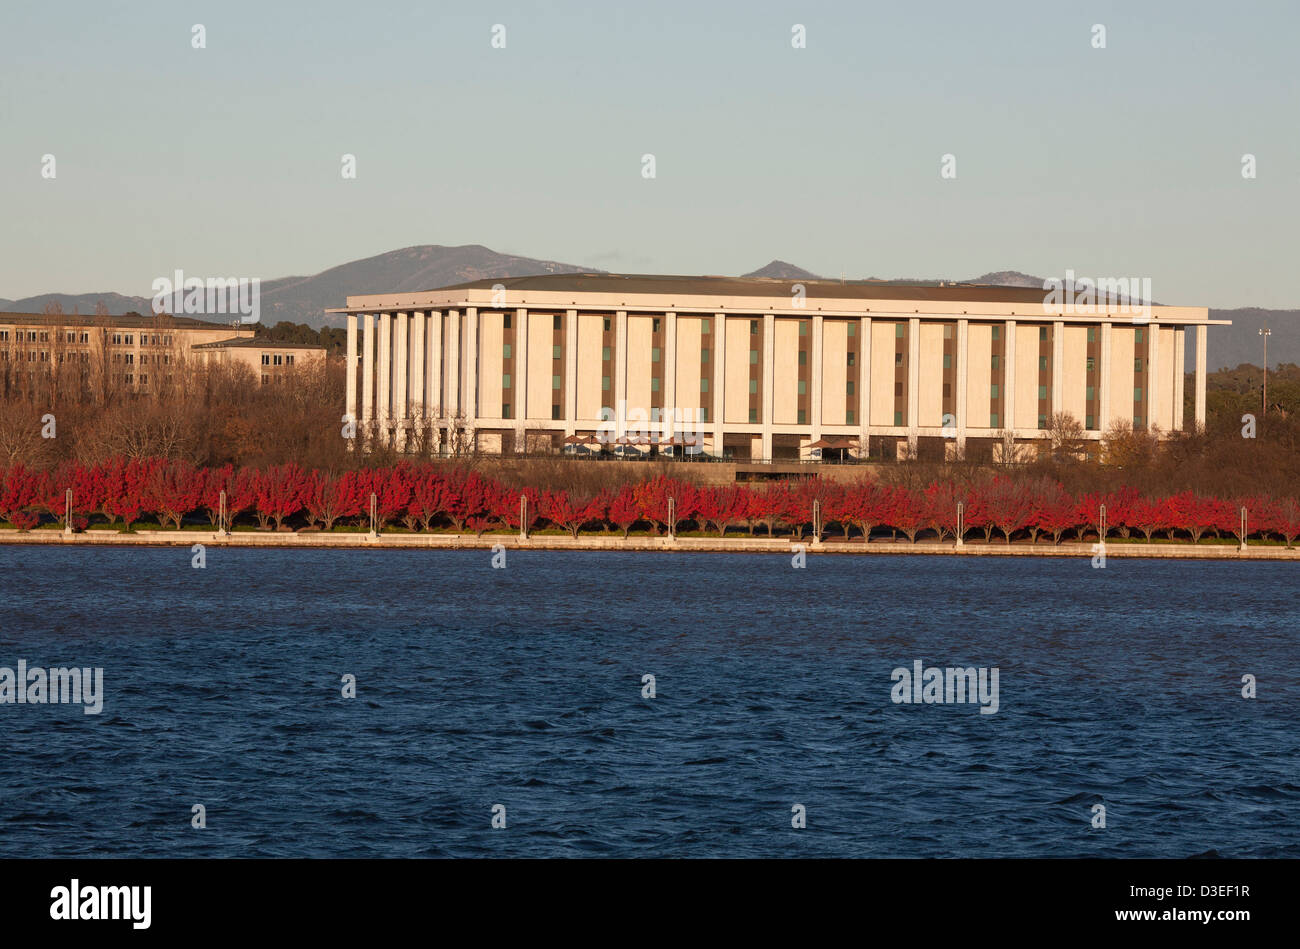 The National Library of Australia building on the shores of Lake Burley Griffin Canberra Australia Stock Photo